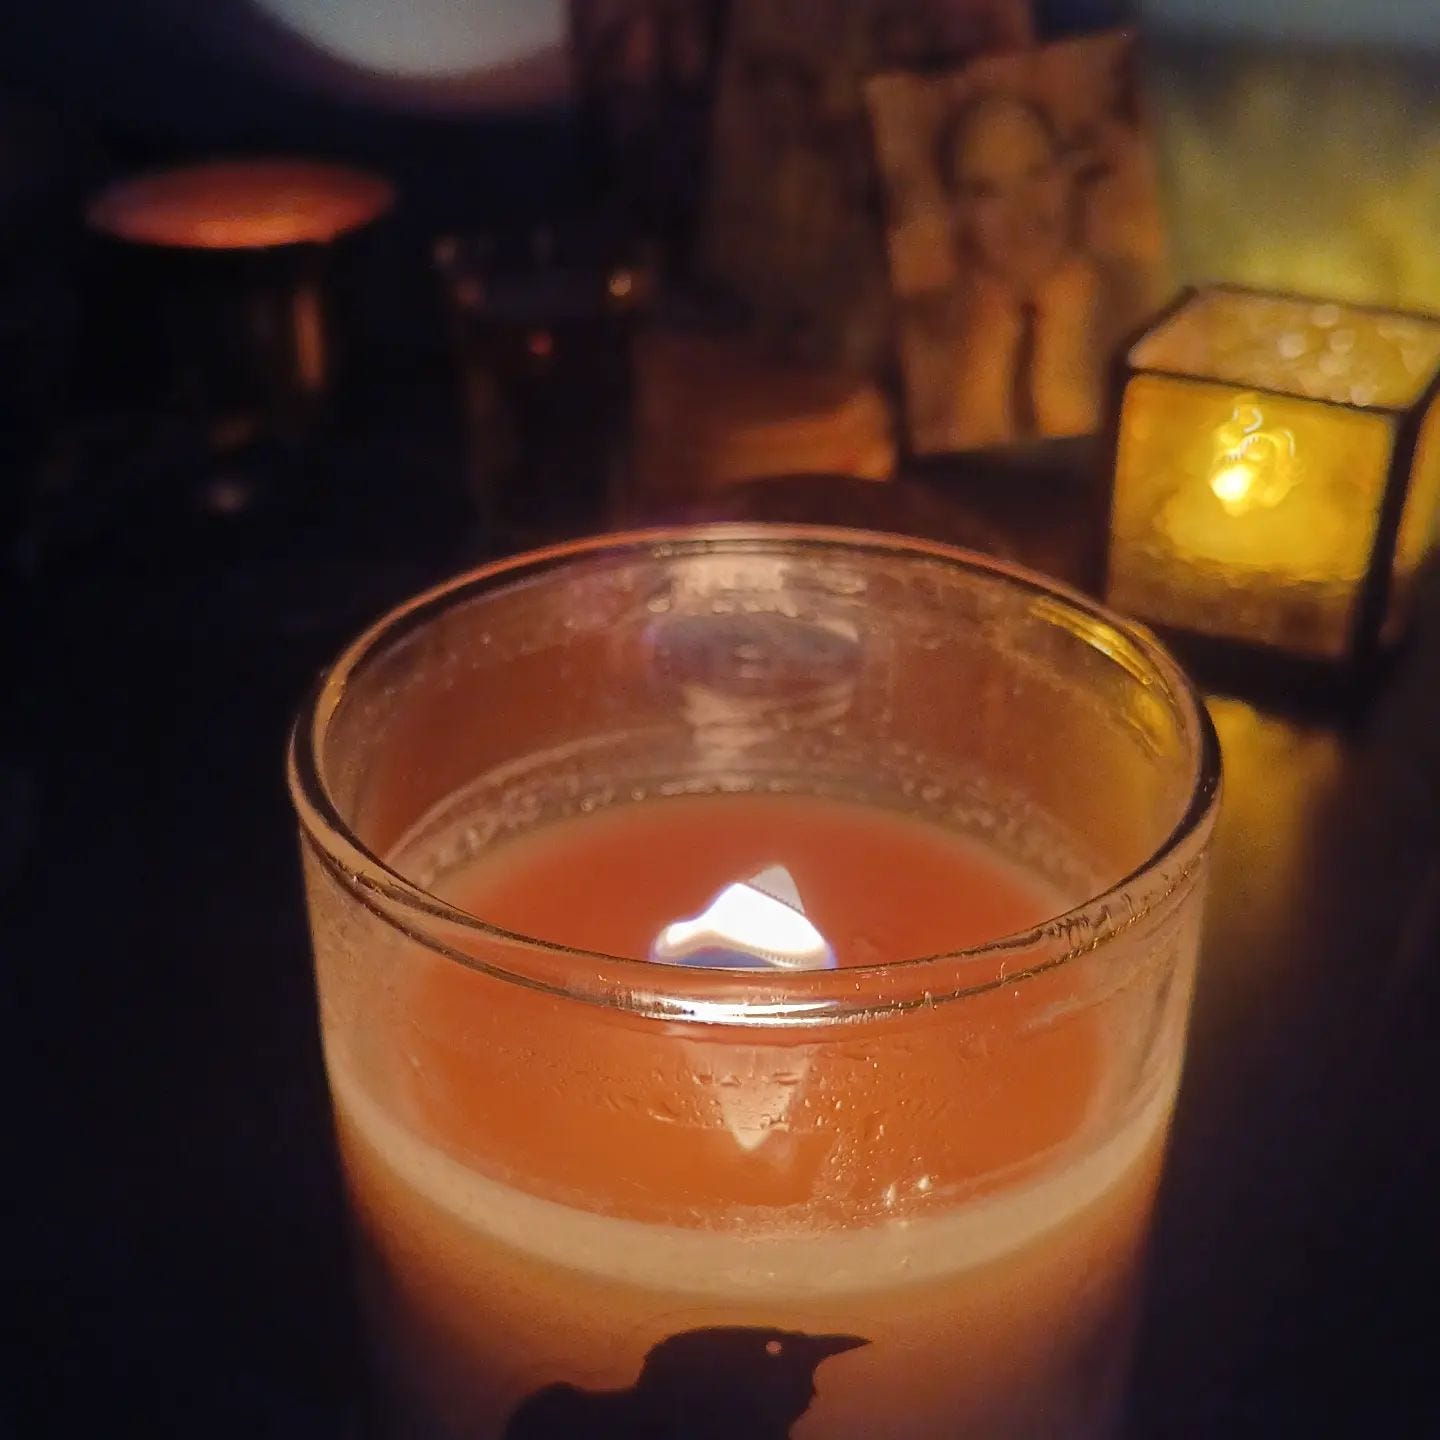 a lit candle with a black raven on the jar, over a background of my ancestor shrine in shadow